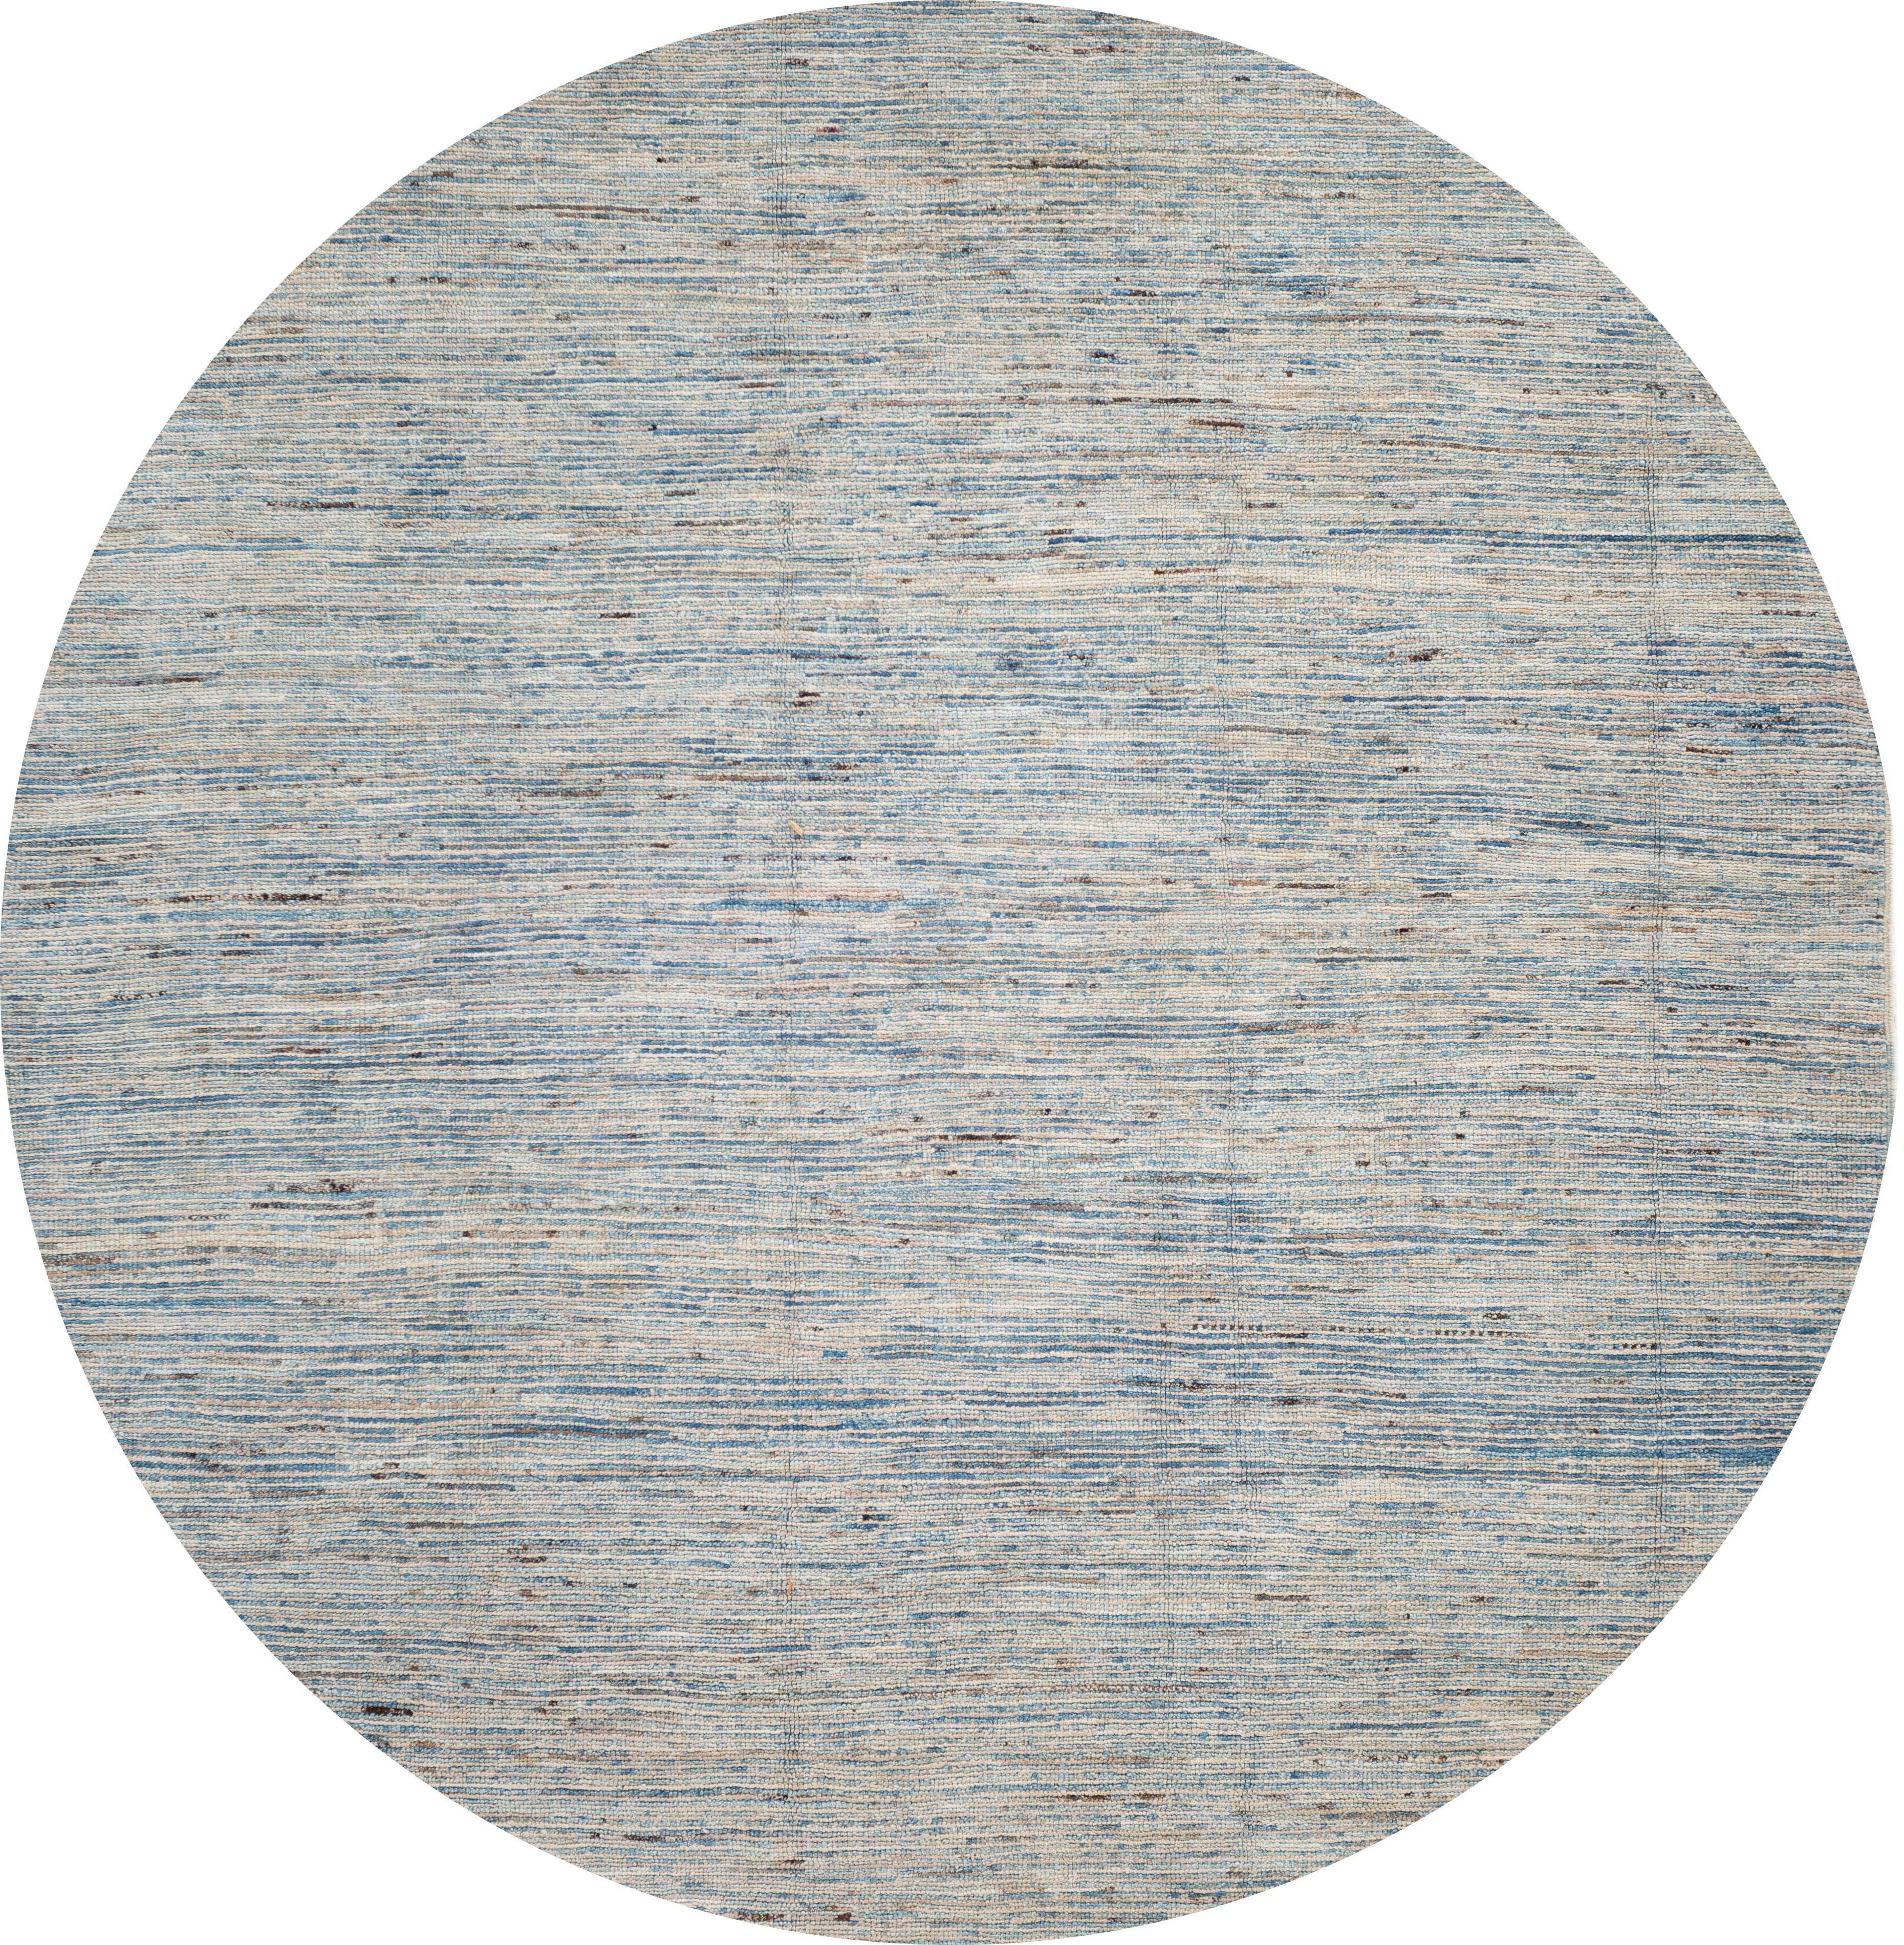 A 21st century Moroccan-style rug, hand knotted from the highest quality wool with a light blue field and finely-striped design. 

This rug measures 7'2